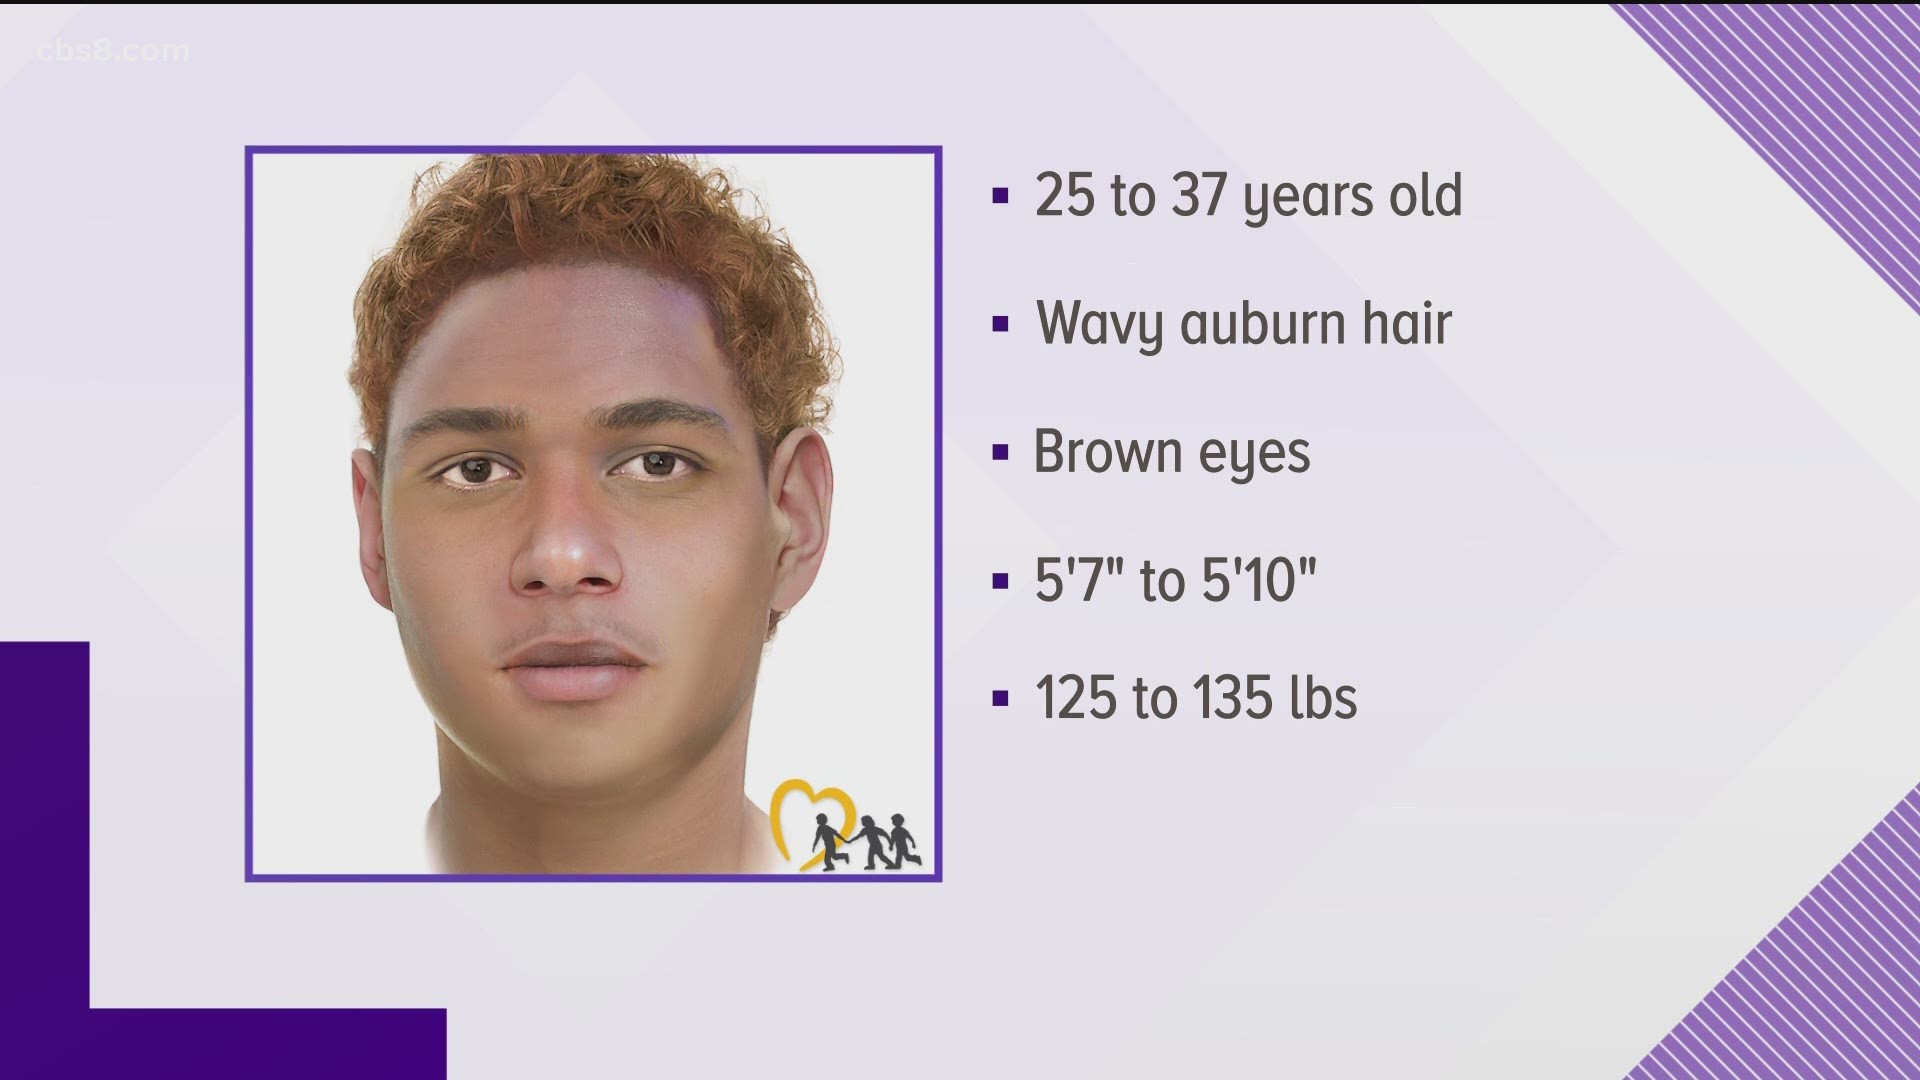 Detectives have been unable to determine the victim's identity, but the National Center for Missing and Exploited Children provided them with an artist's rendering.